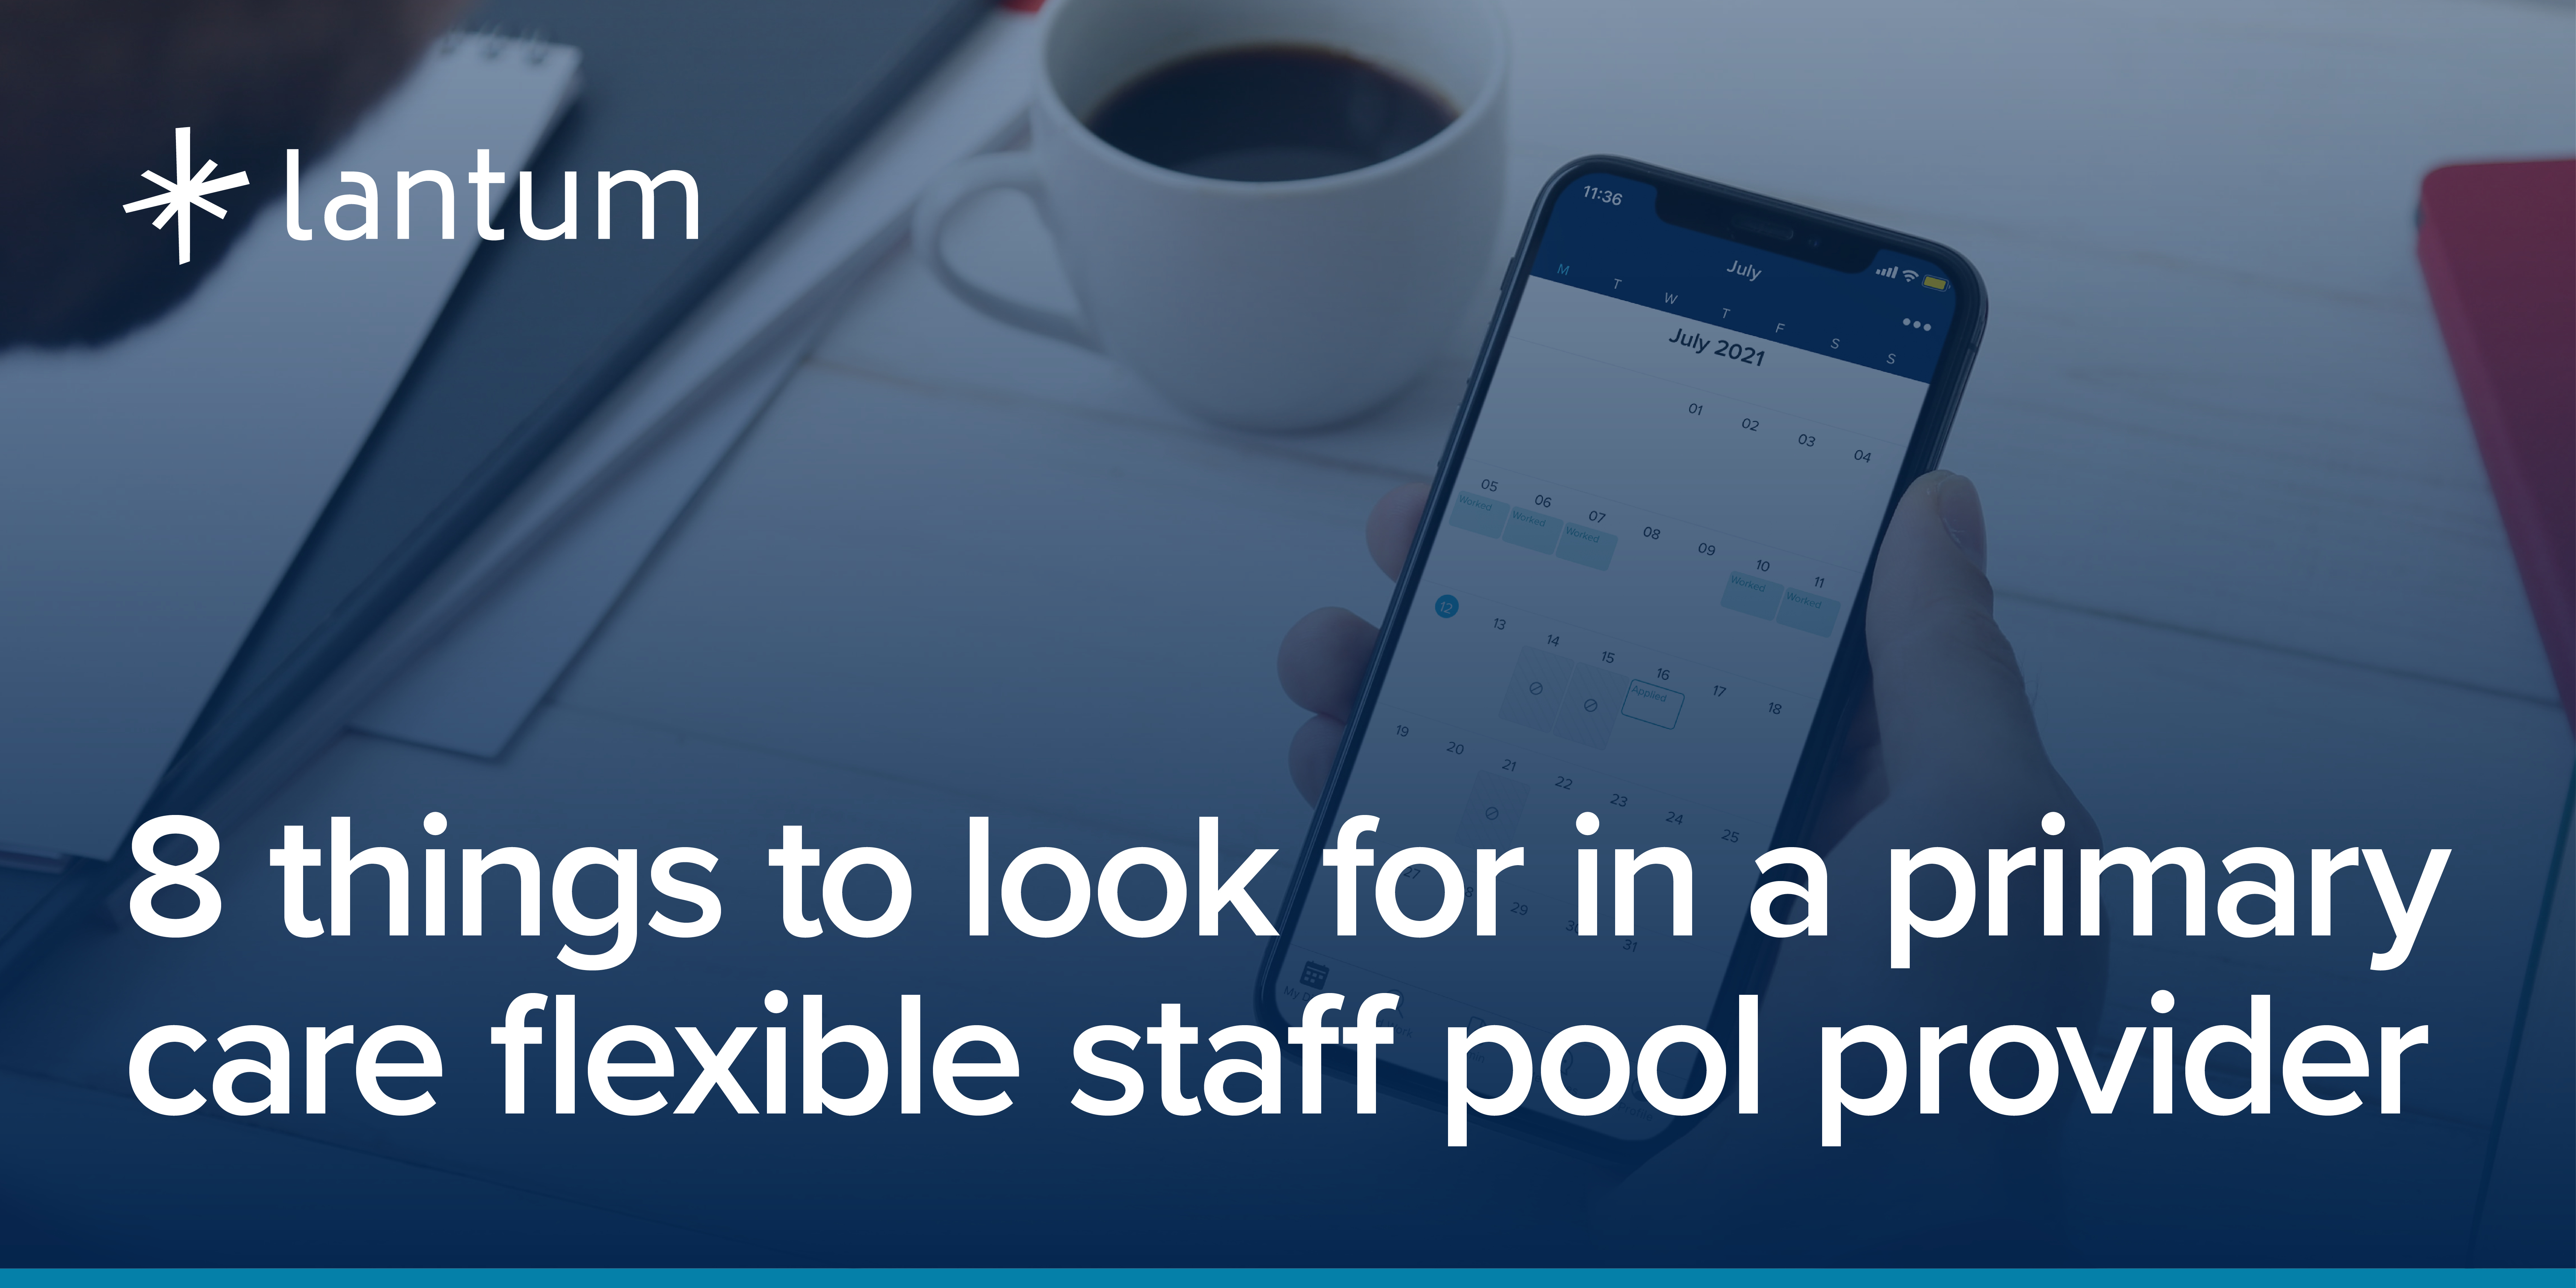 8 things to look for in a primary care flexible staff pool provider.